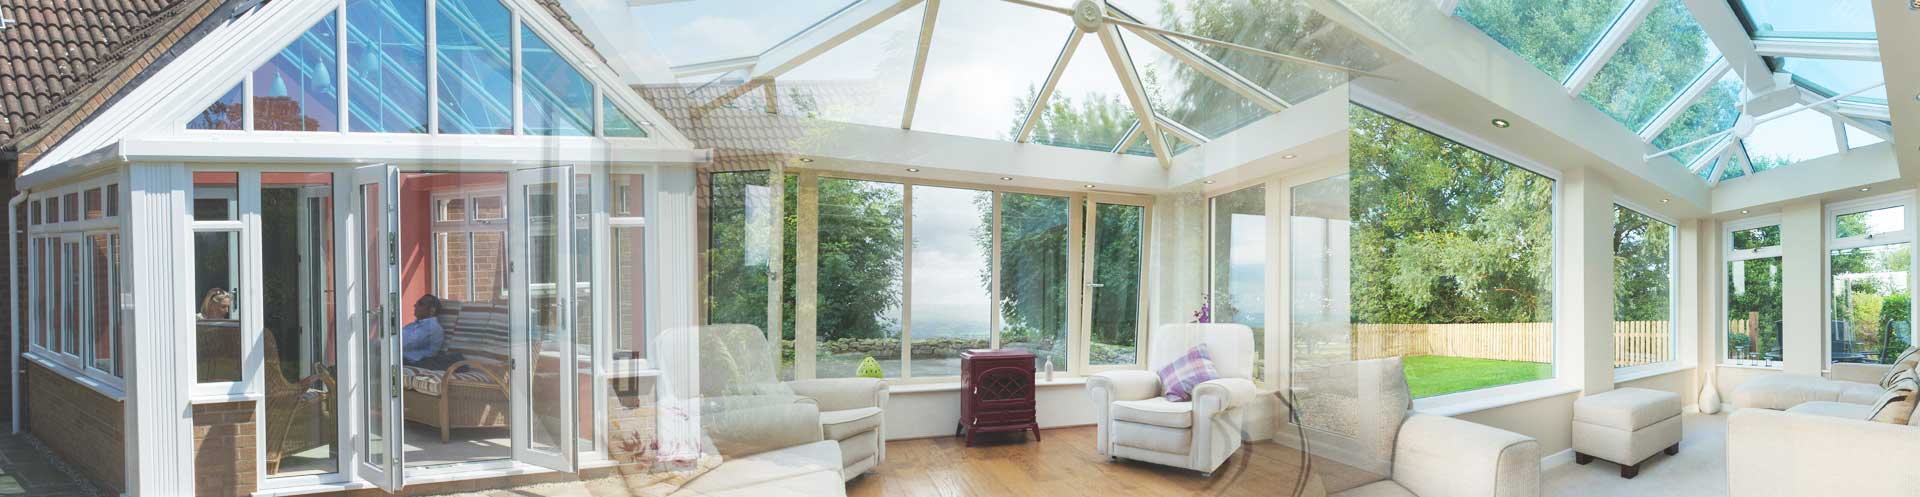 Conservatories and conservatory roofs